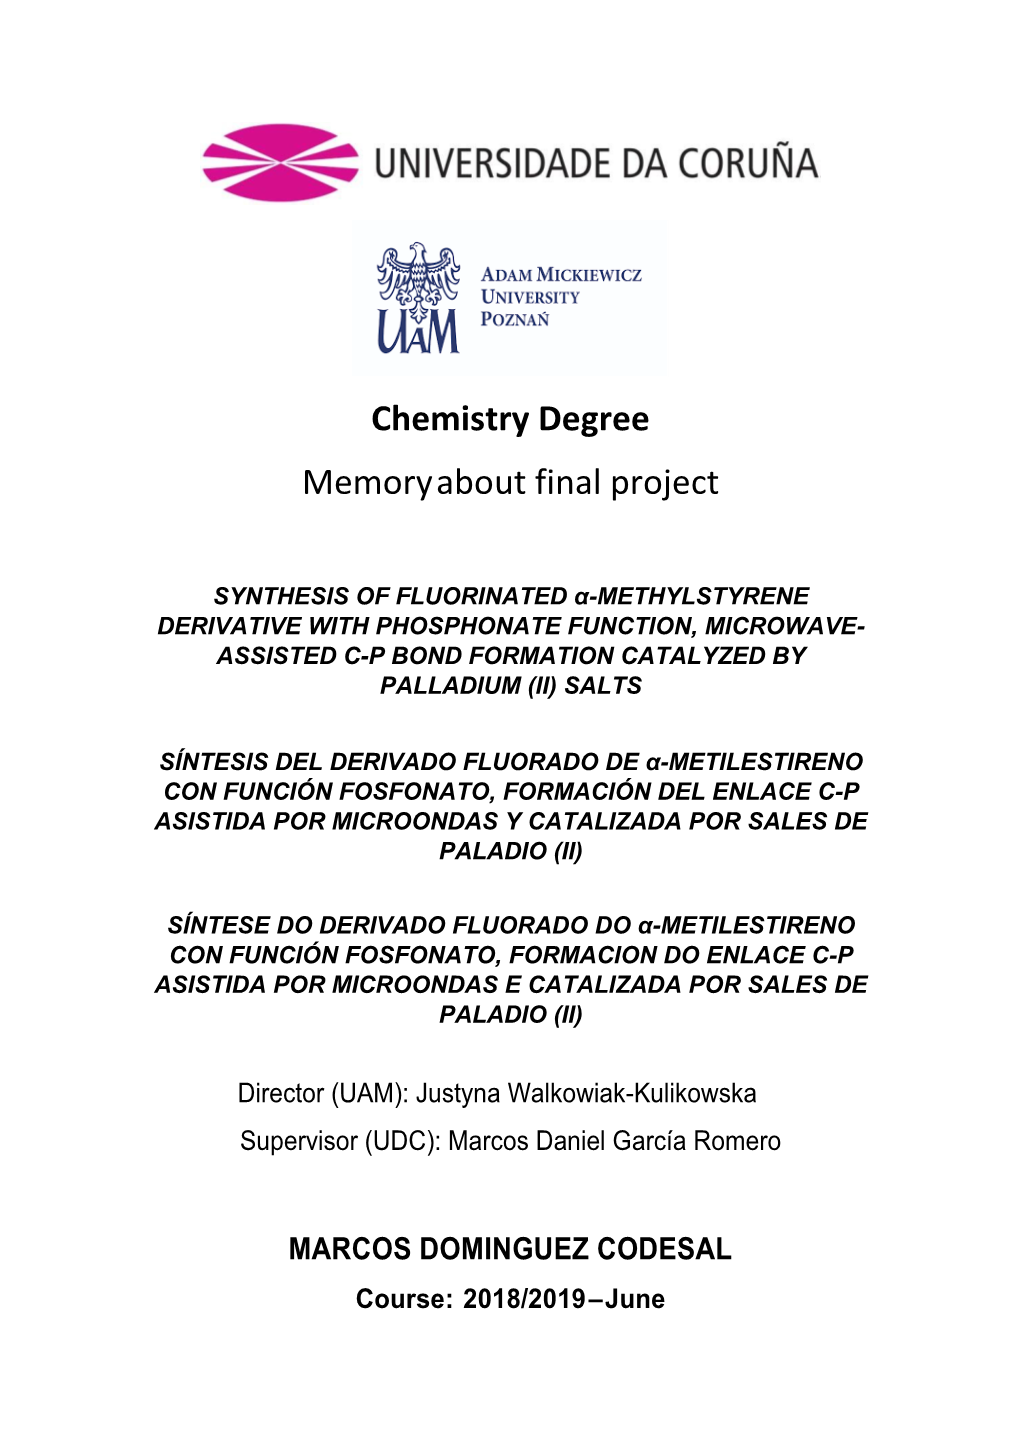 Chemistry Degree Memory About Final Project